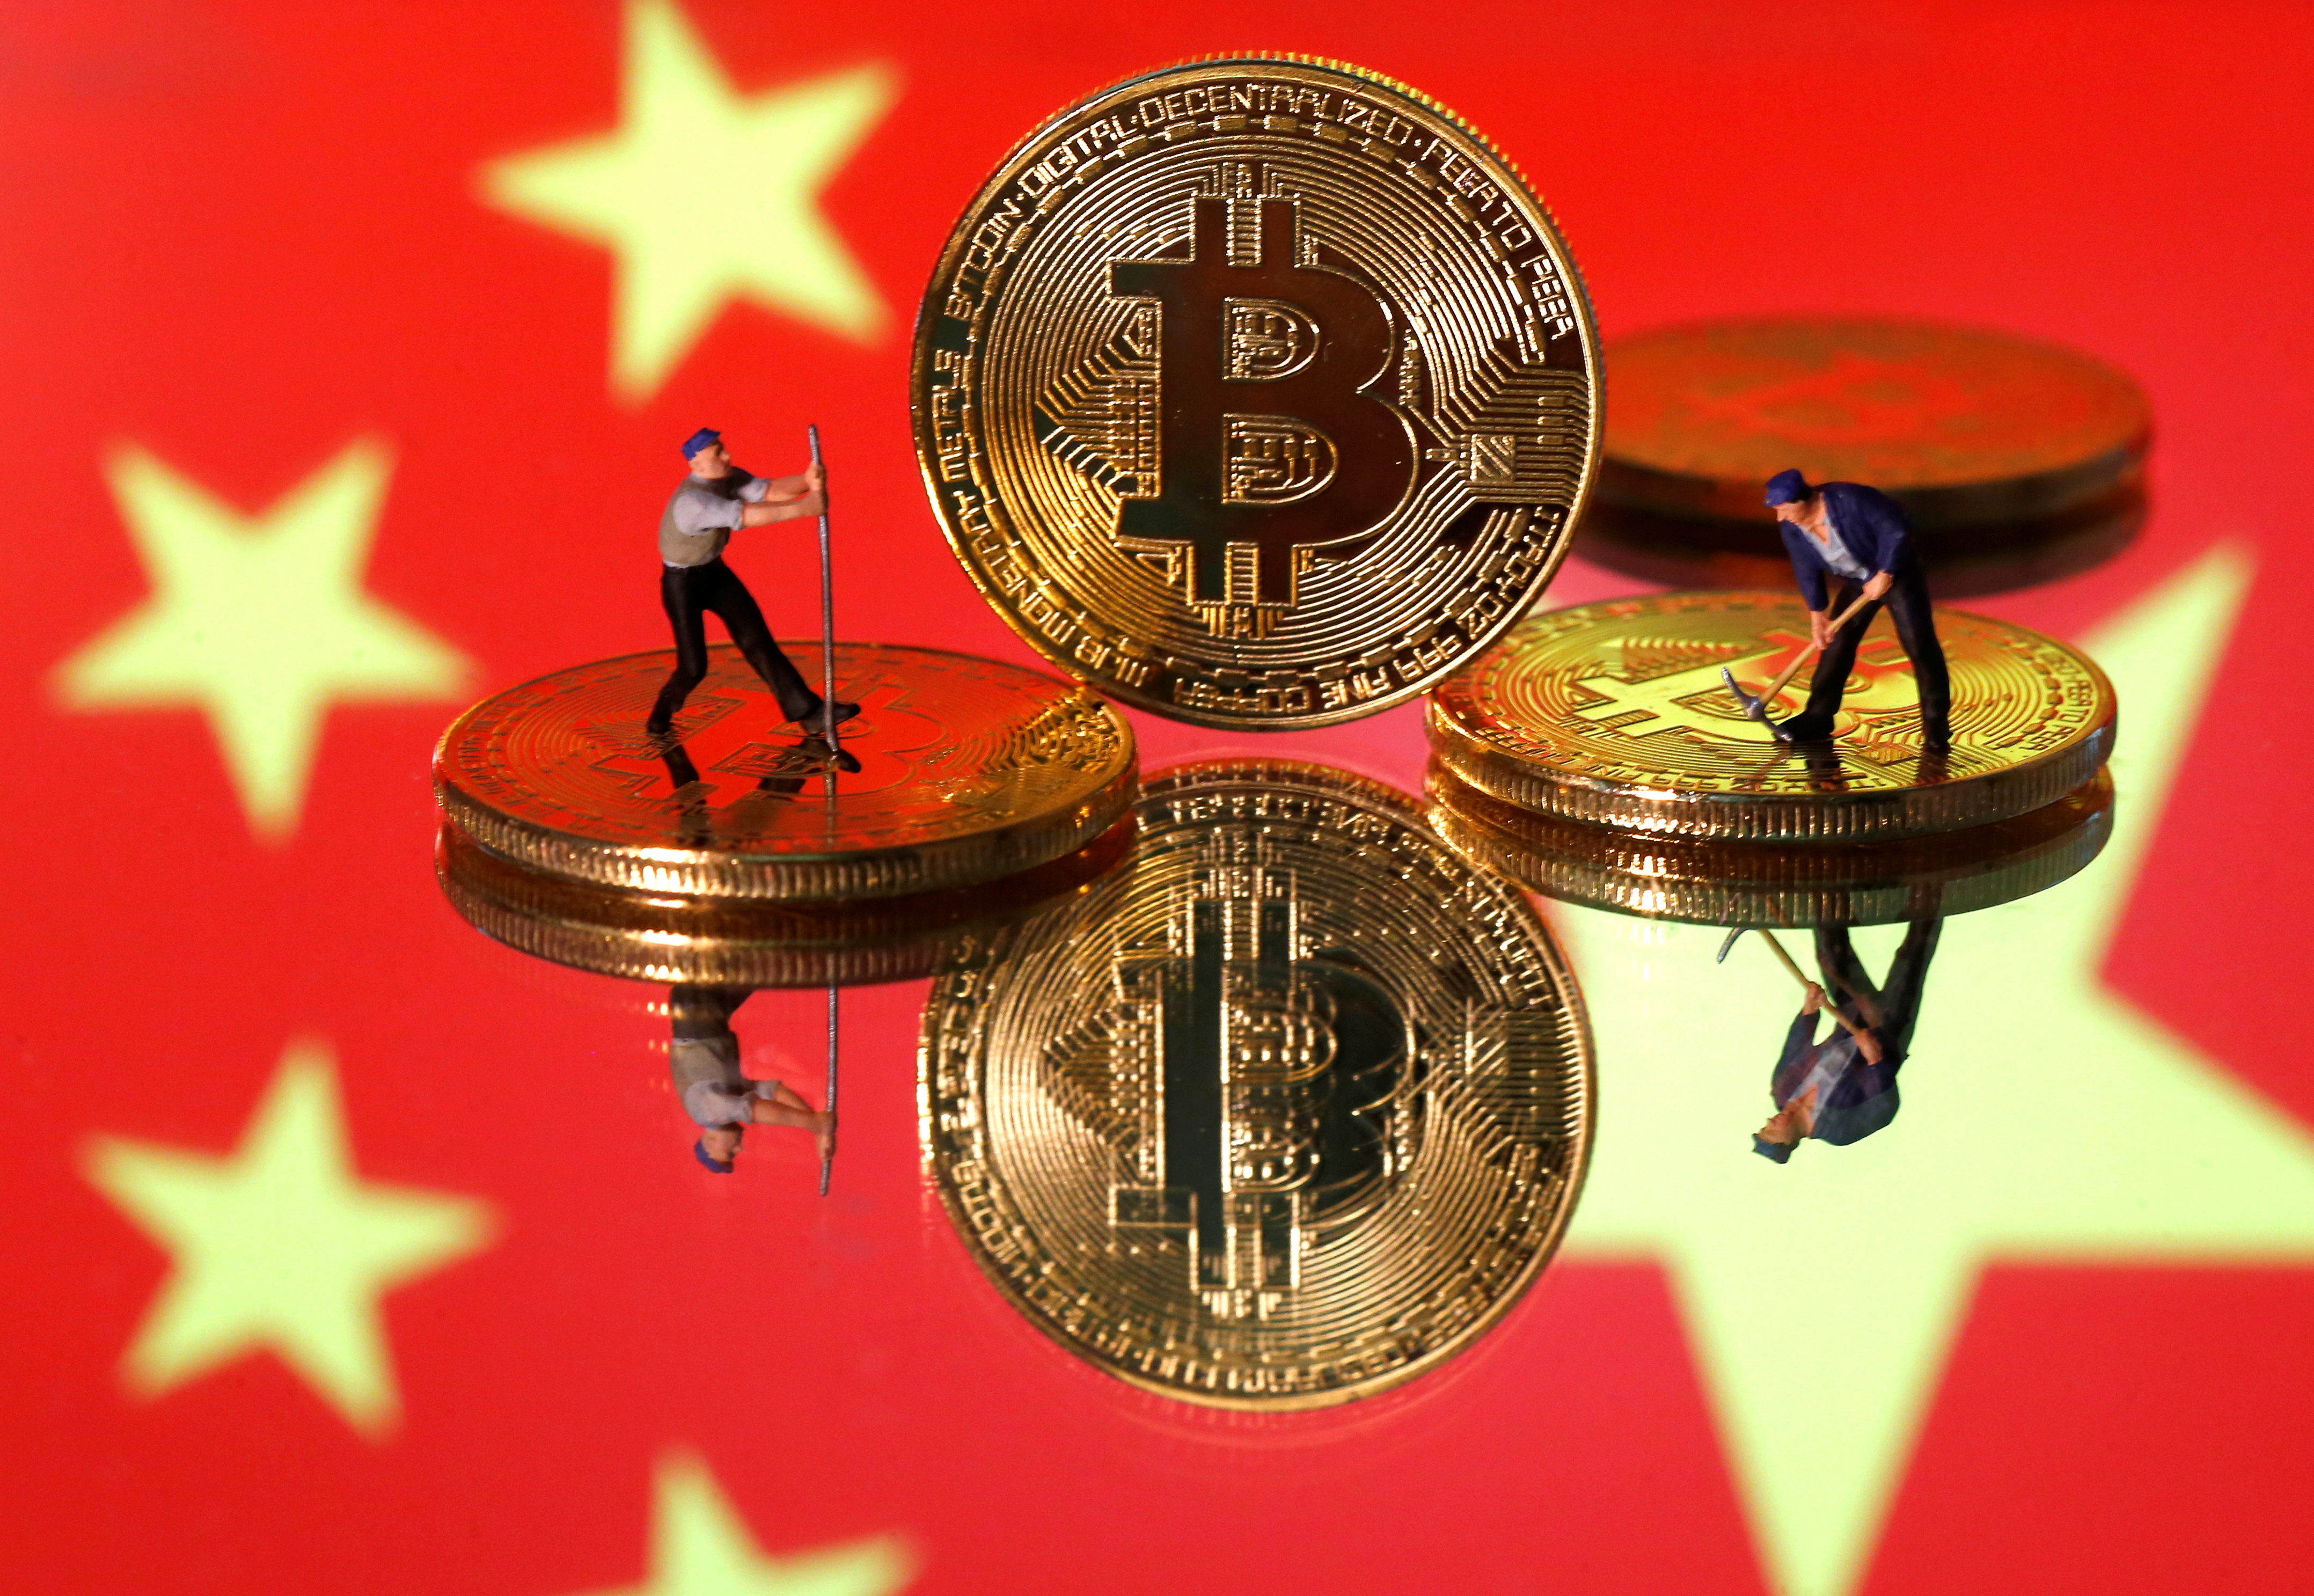 Fact Check: Can China Destroy And Crash Bitcoin With A 51% Attack?